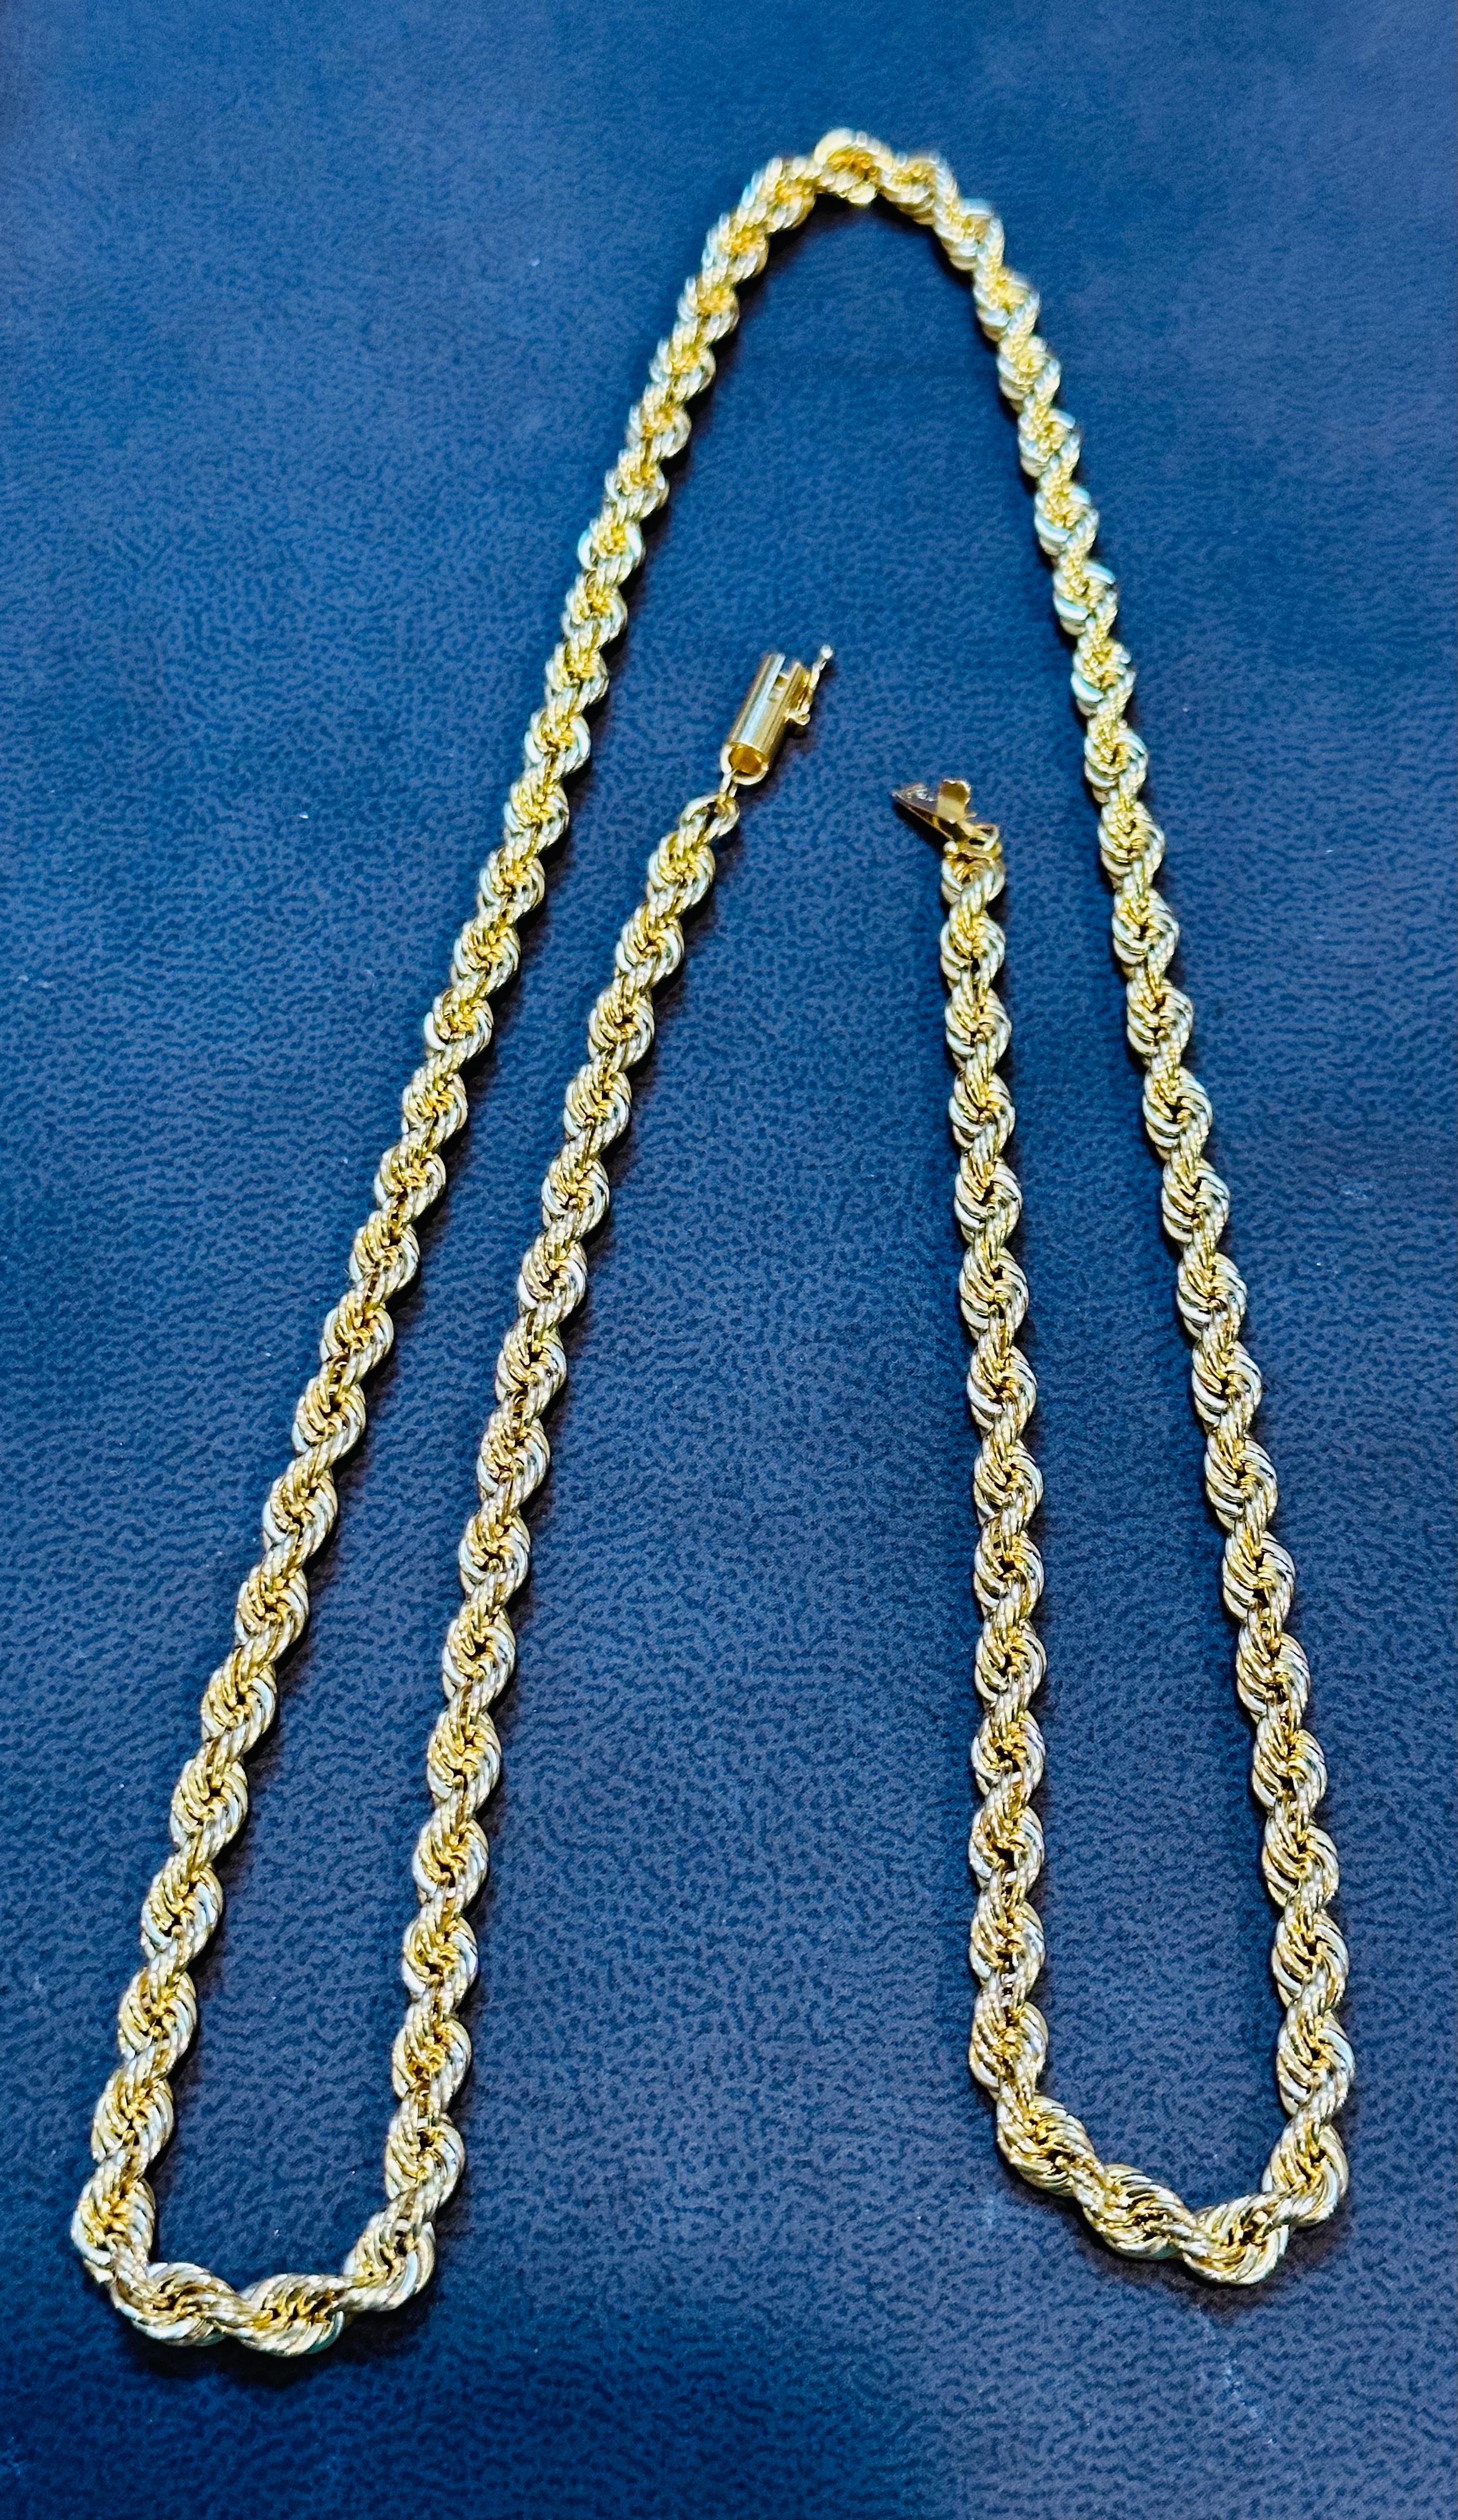 Vintage 14 Karat Yellow Gold 17 Gm, Rope Chain Necklace, 24 Inch long For Sale 3